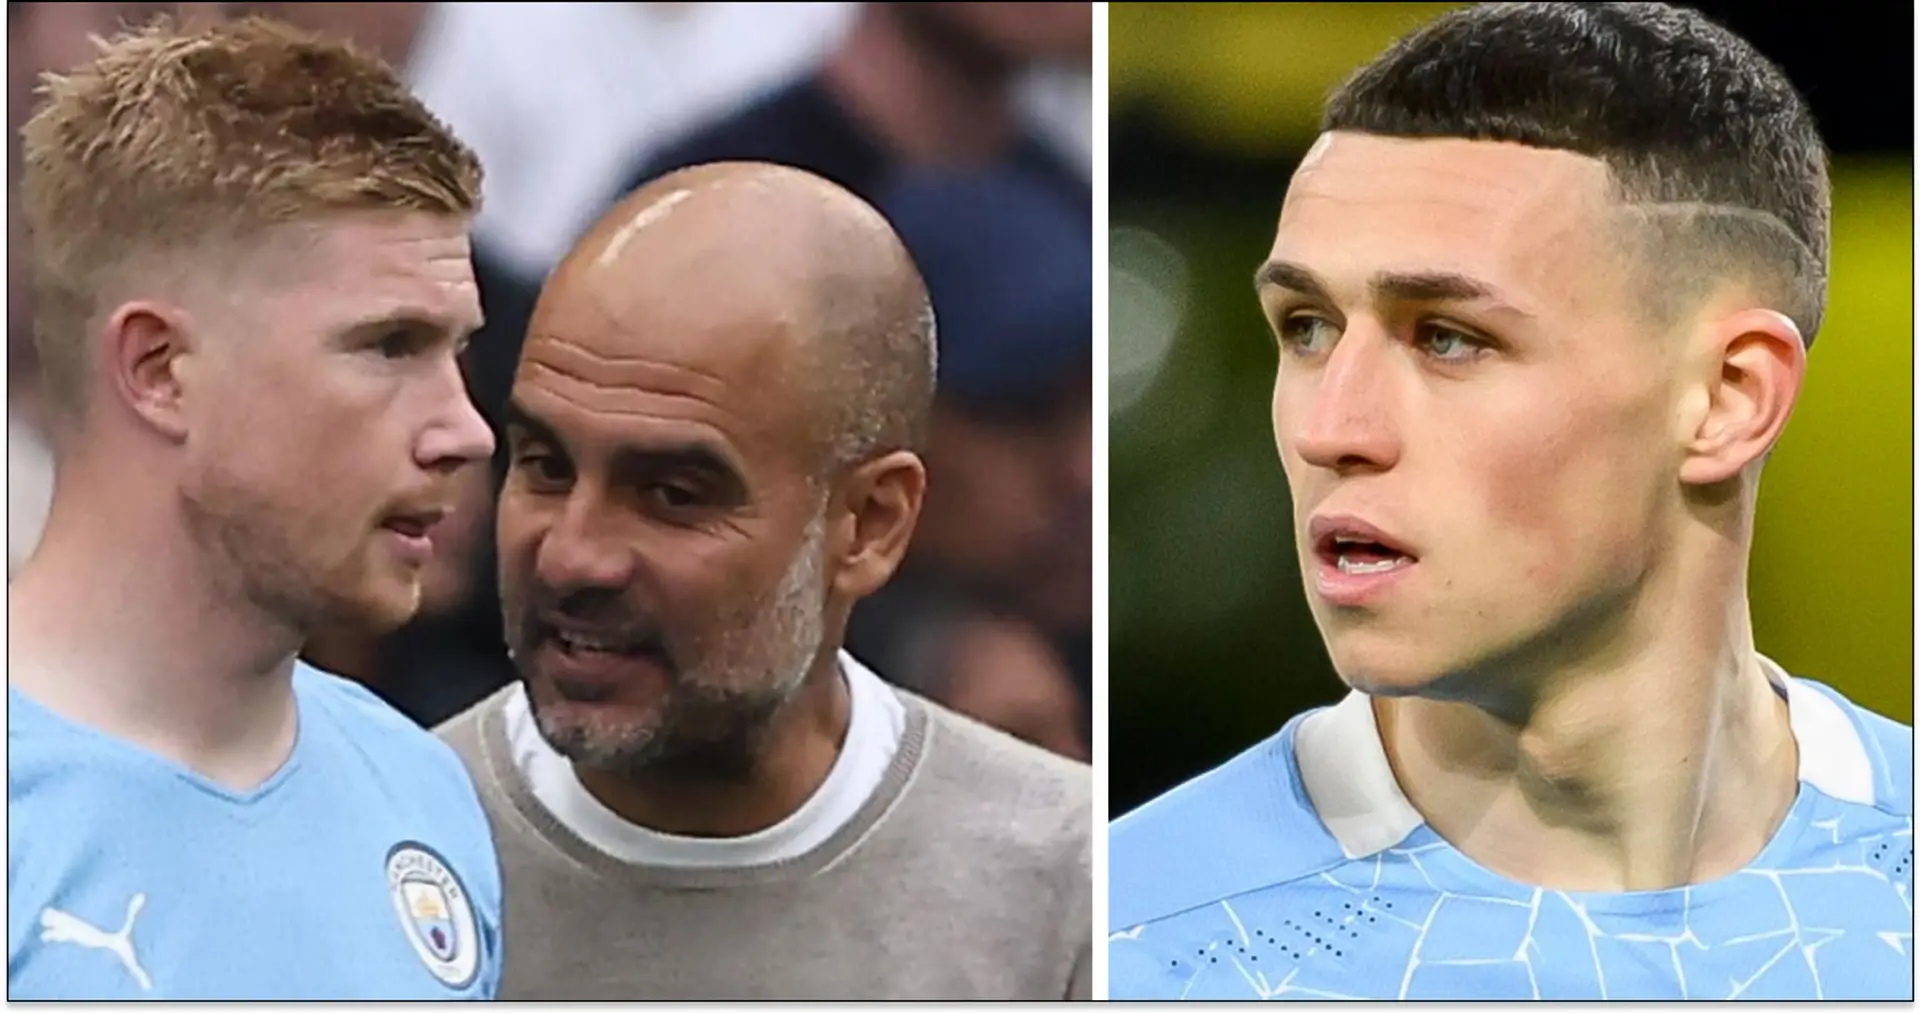 Pep told to play De Bruyne & Foden as no. 10's behind Haaland — 'mouthwatering' attack shown in lineup